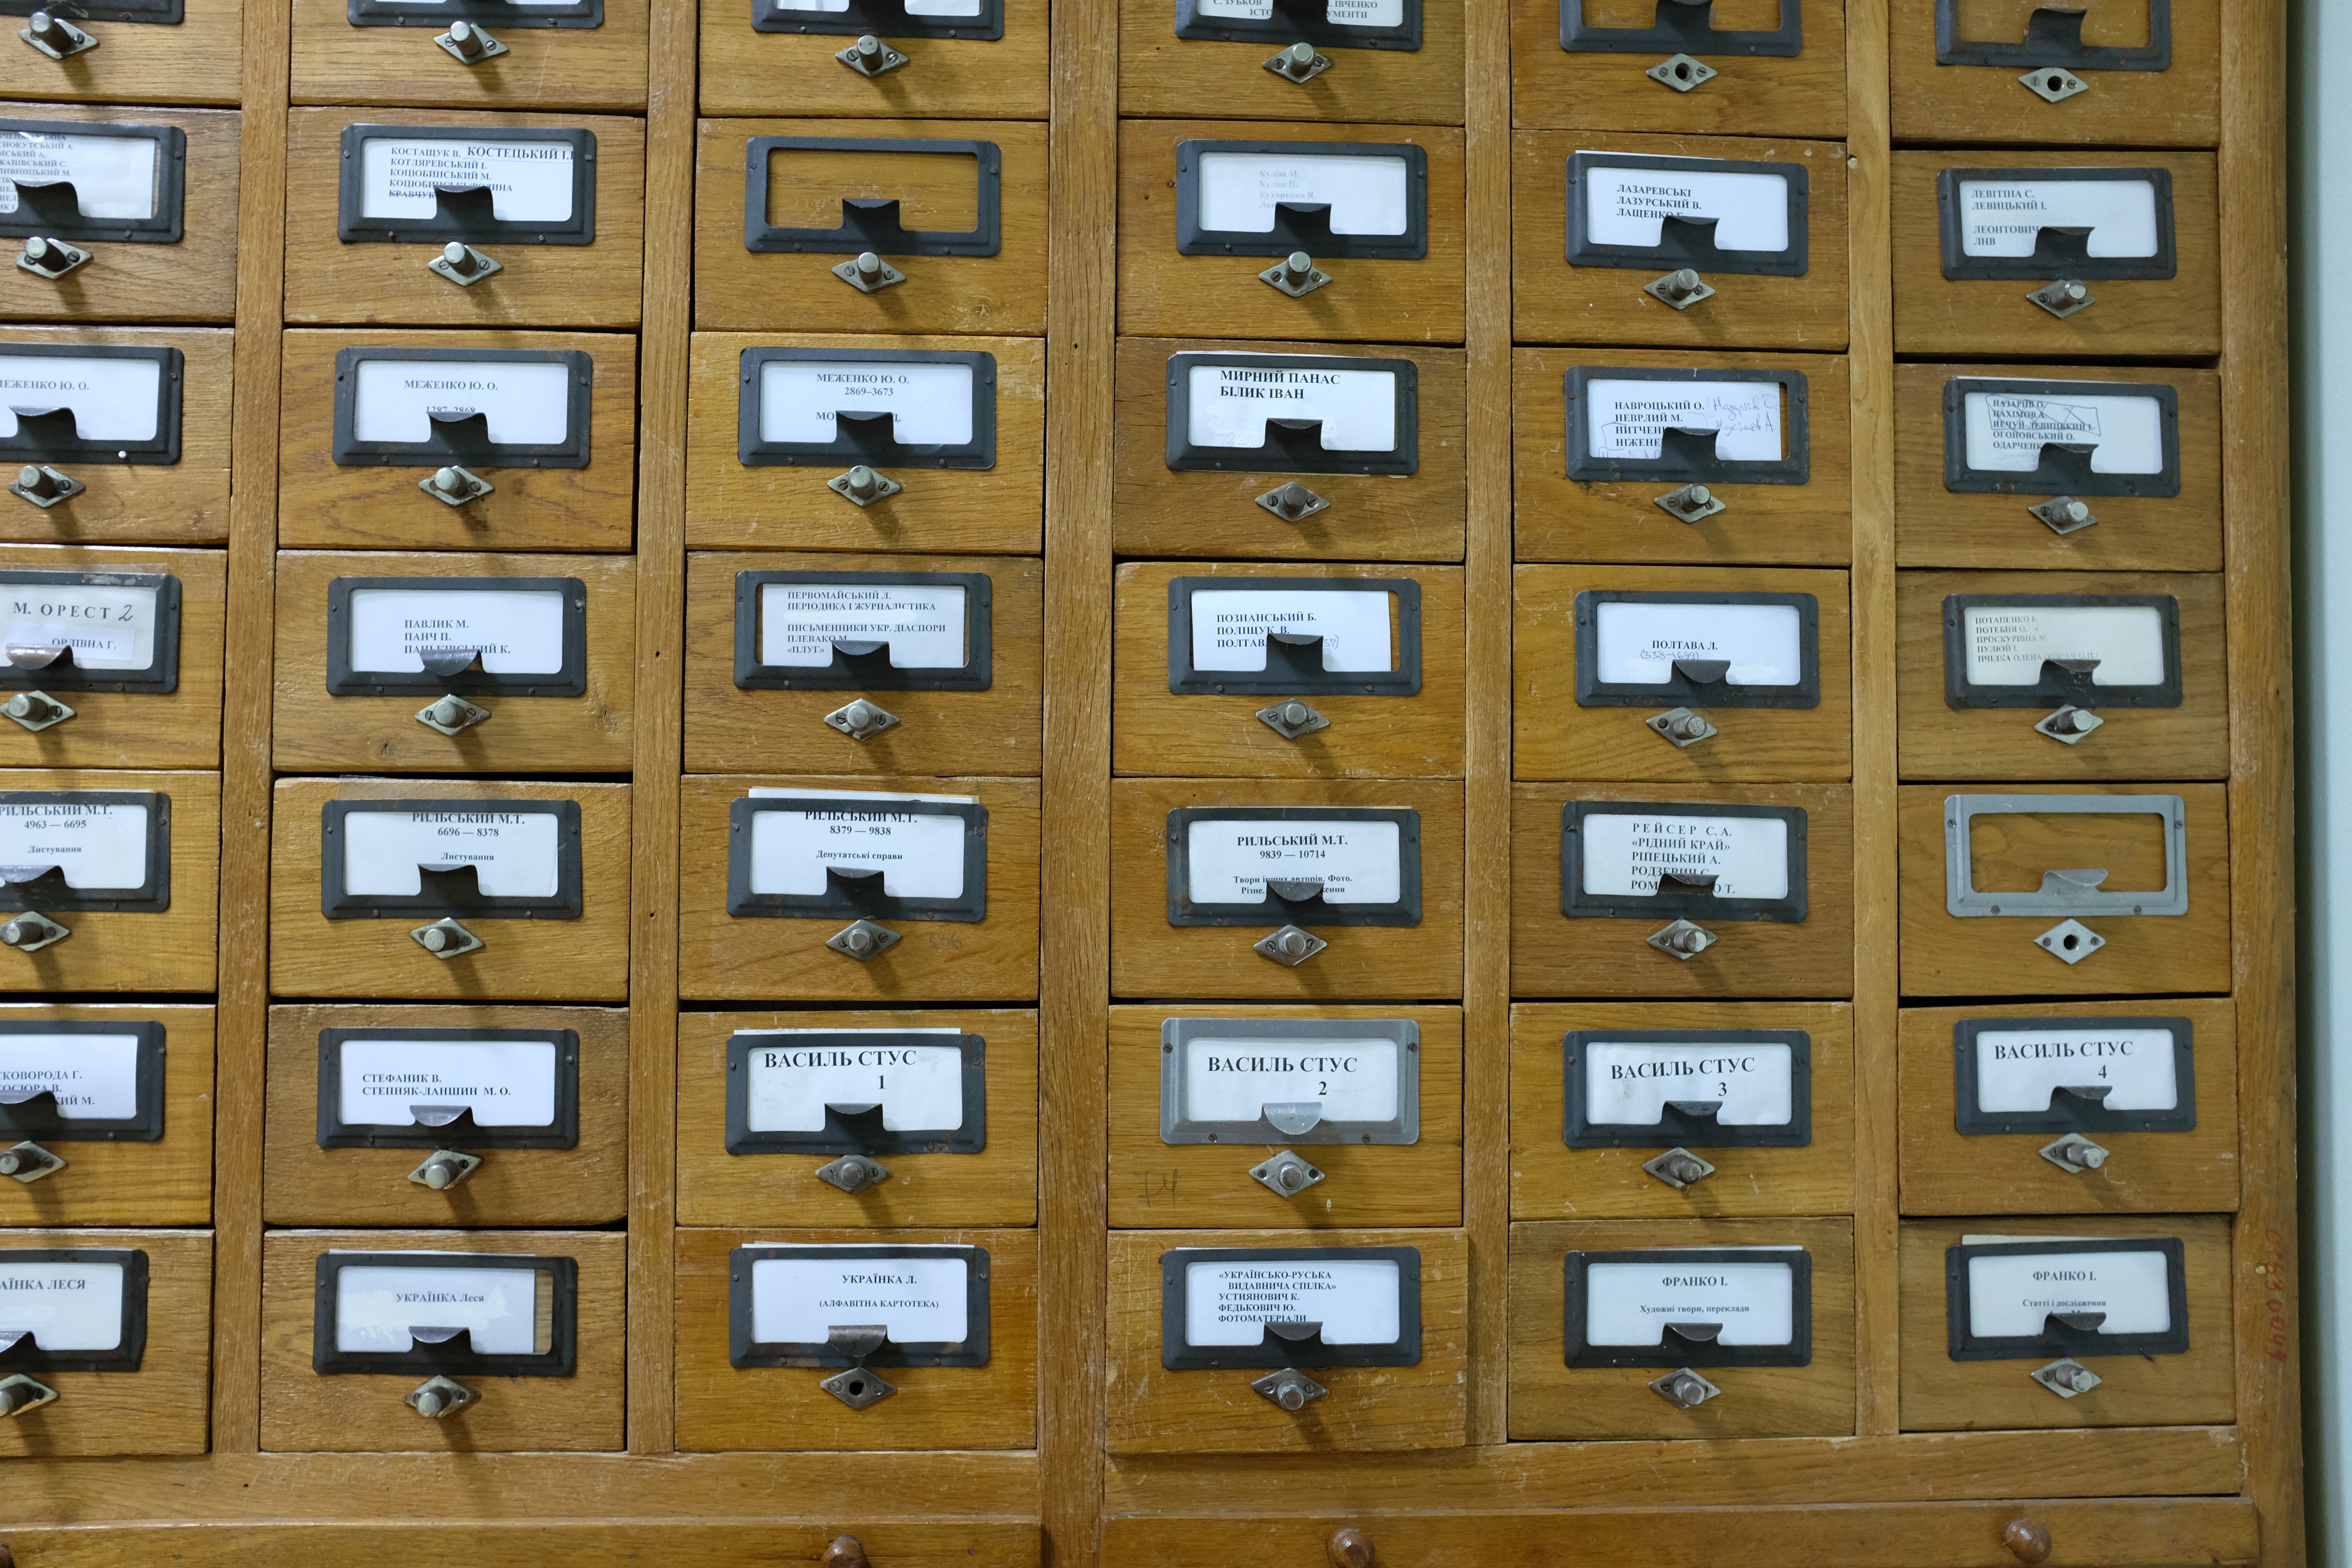 The card catalogue at the T. H. Shevchenko Institute of Literature of the National Academy of Sciences of Ukraine, Kyiv. 